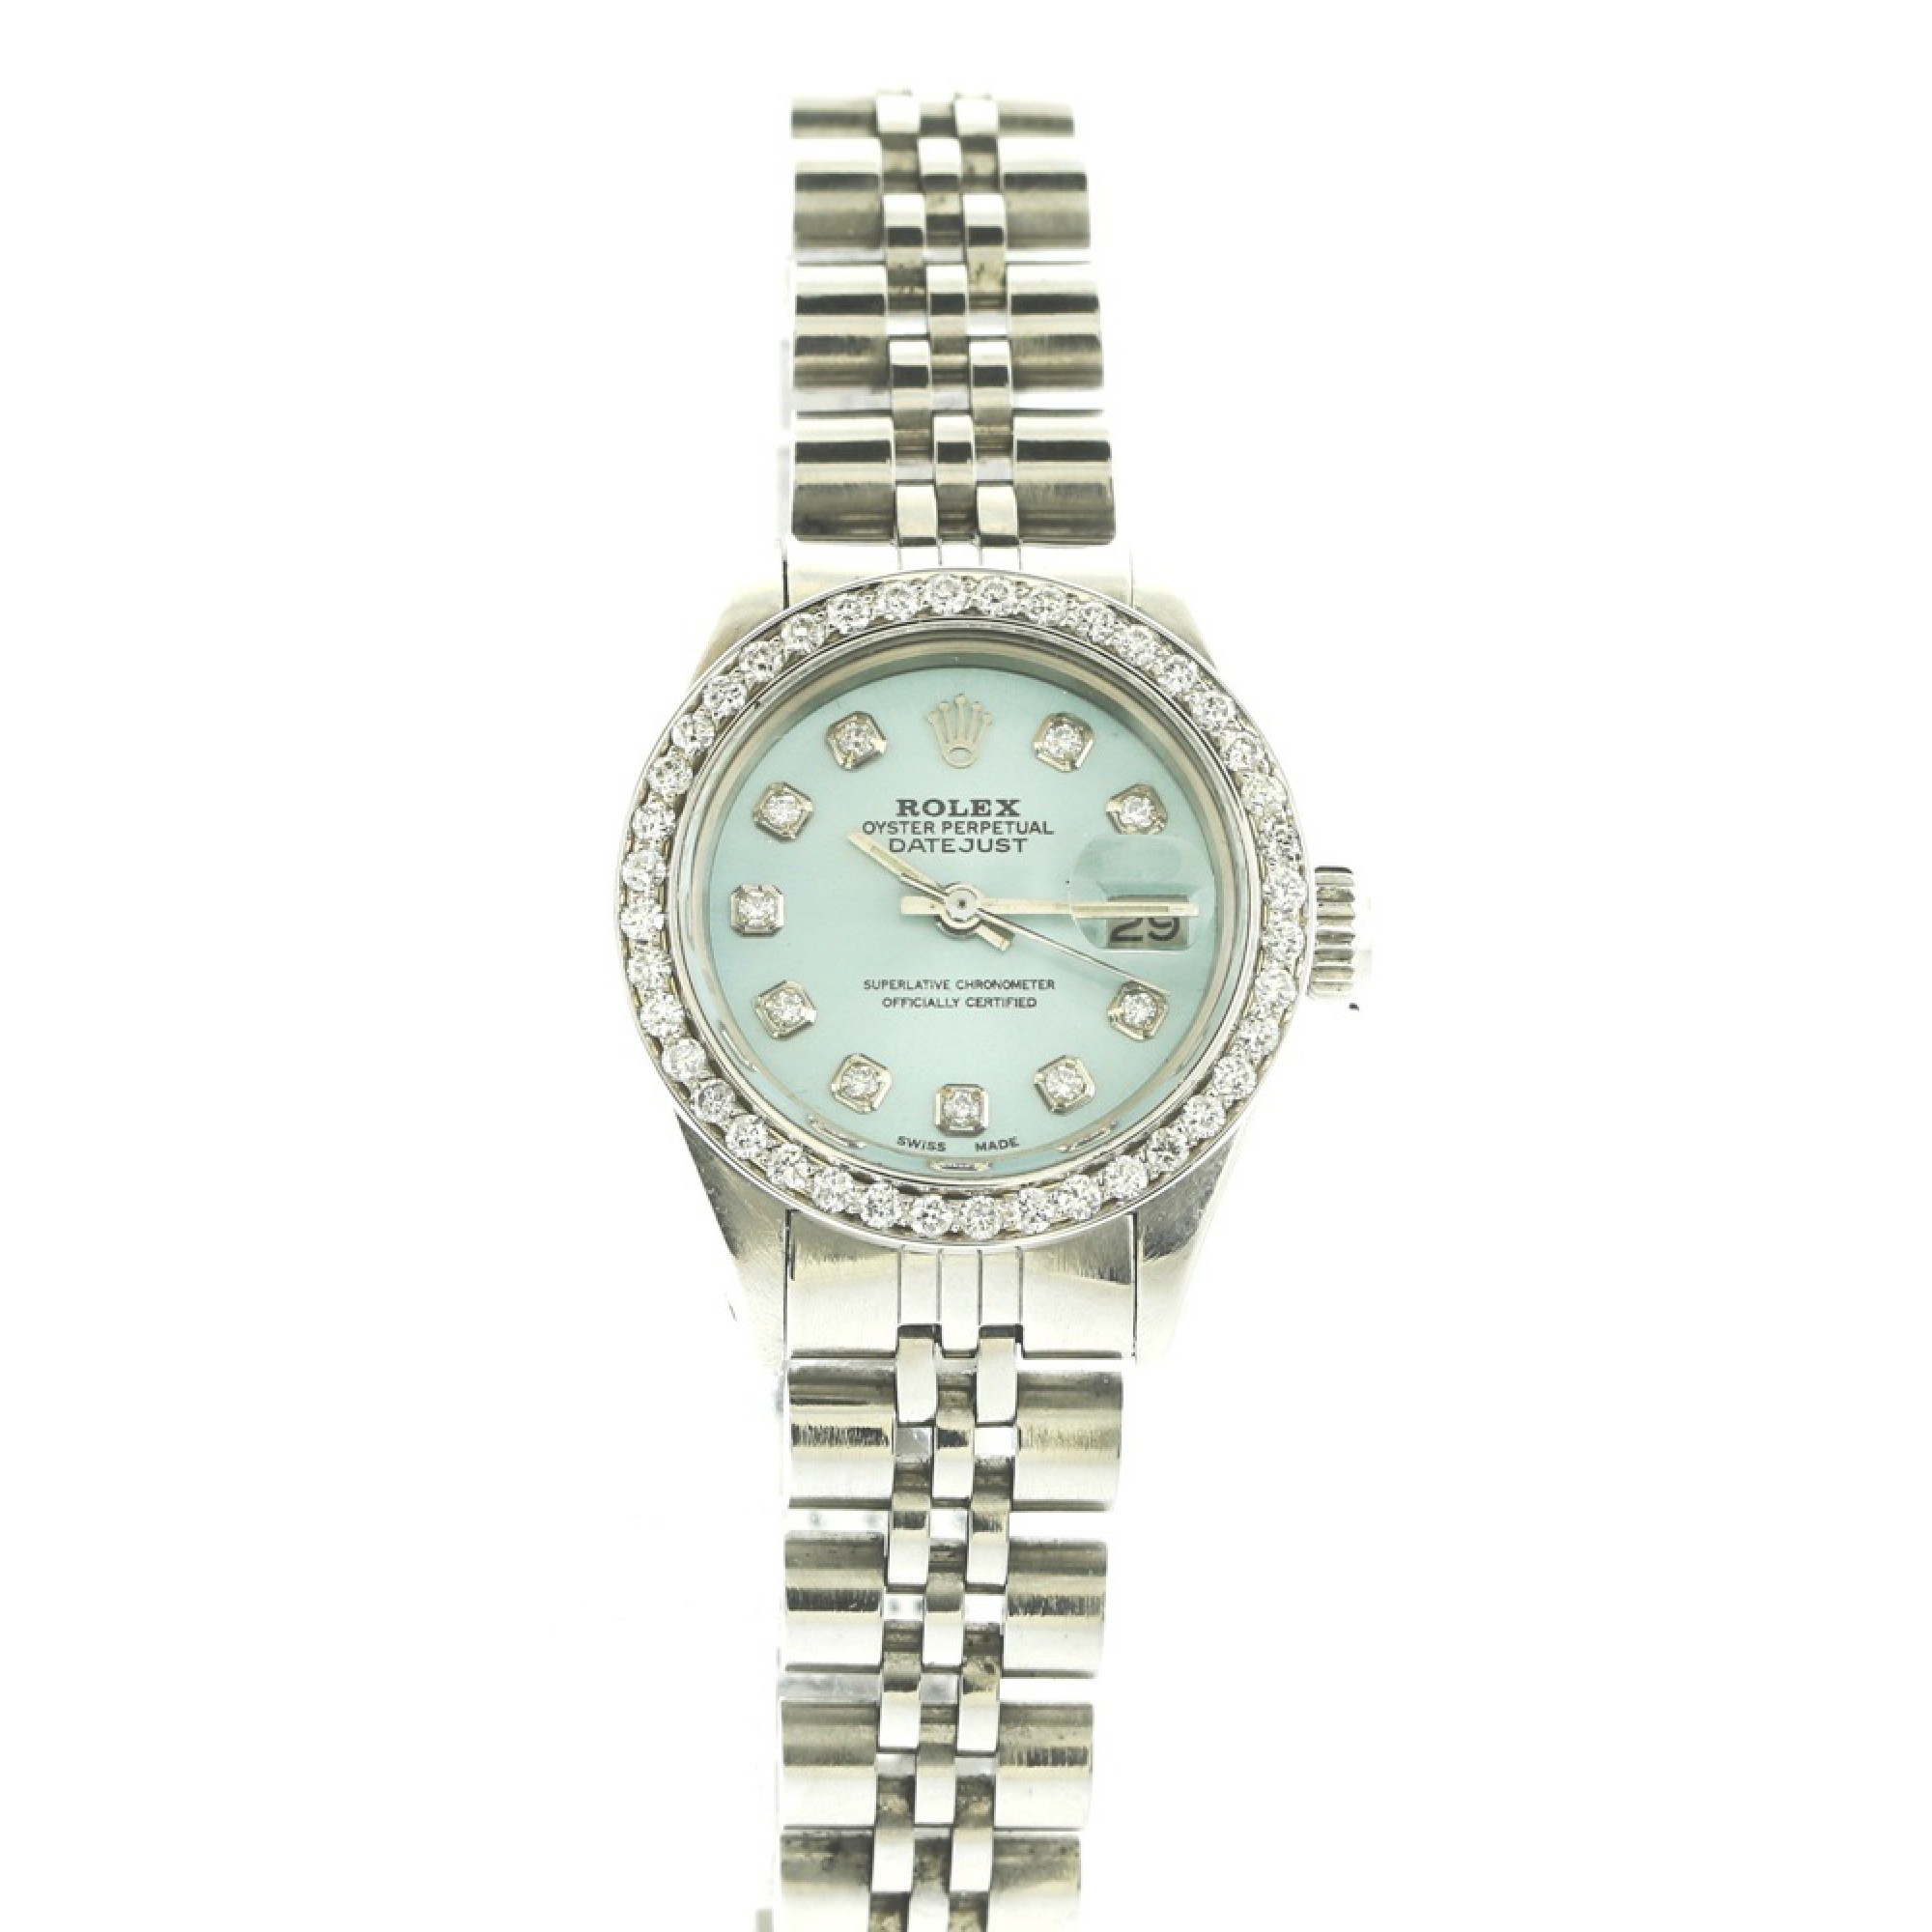 Rolex Lady Datejust Stainless Steel Price